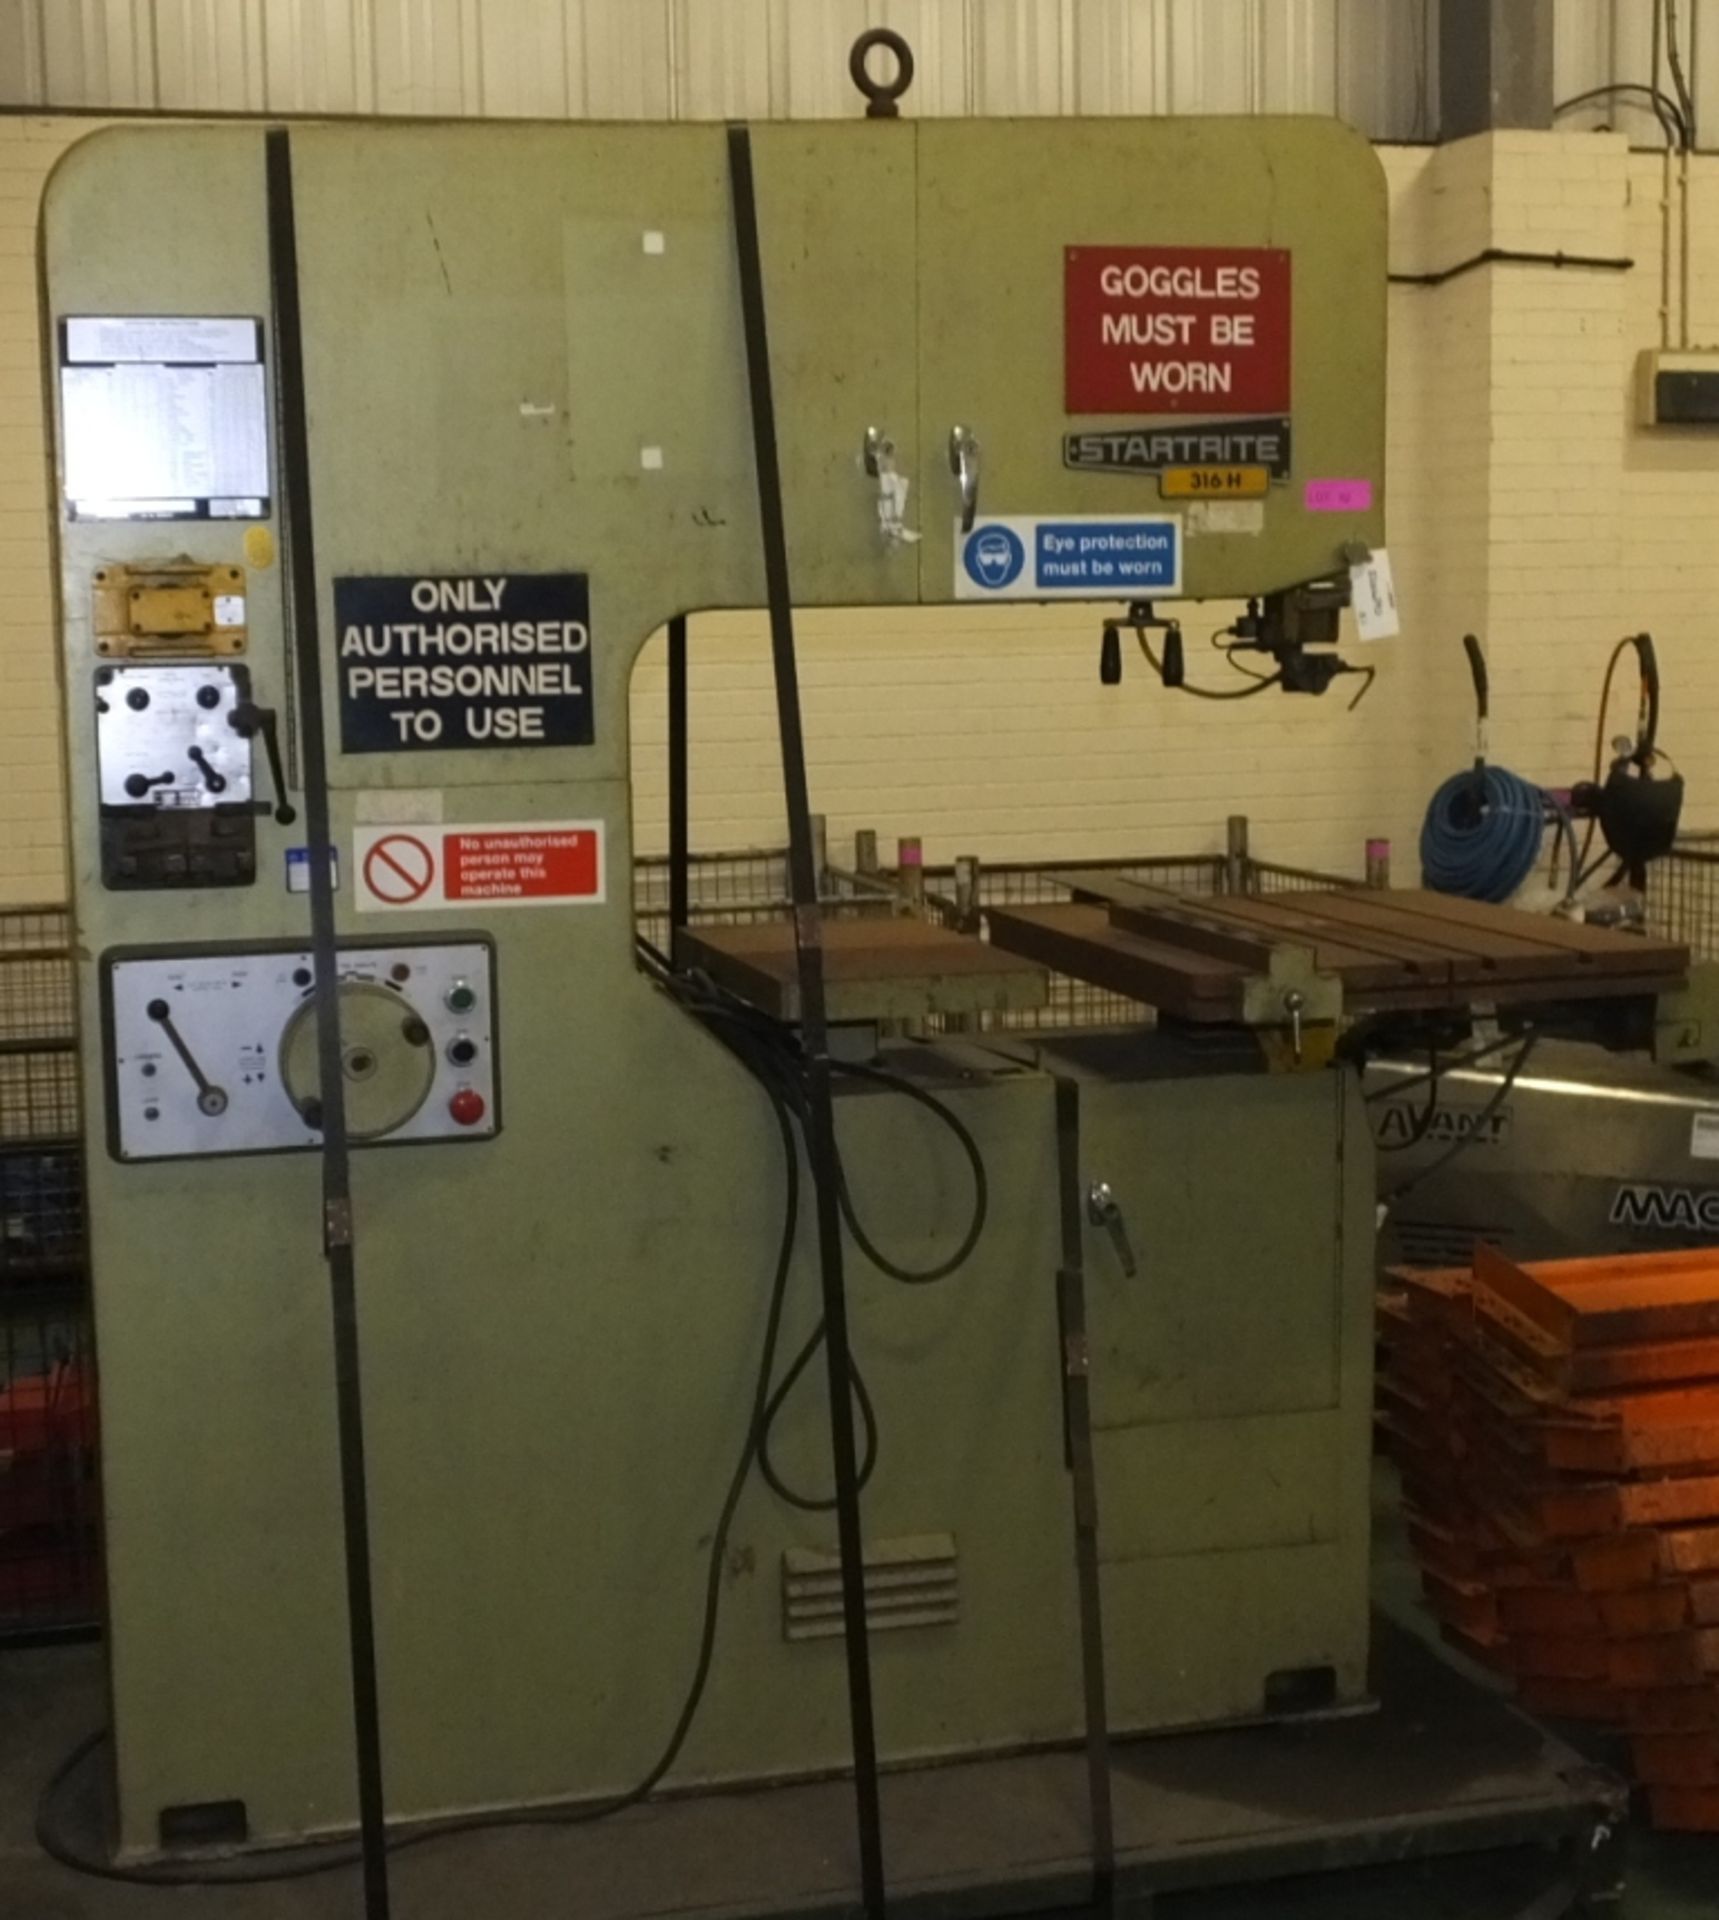 Startrite 316H Metalworking Bandsaw - £5+VAT lift out charge applied to this lot